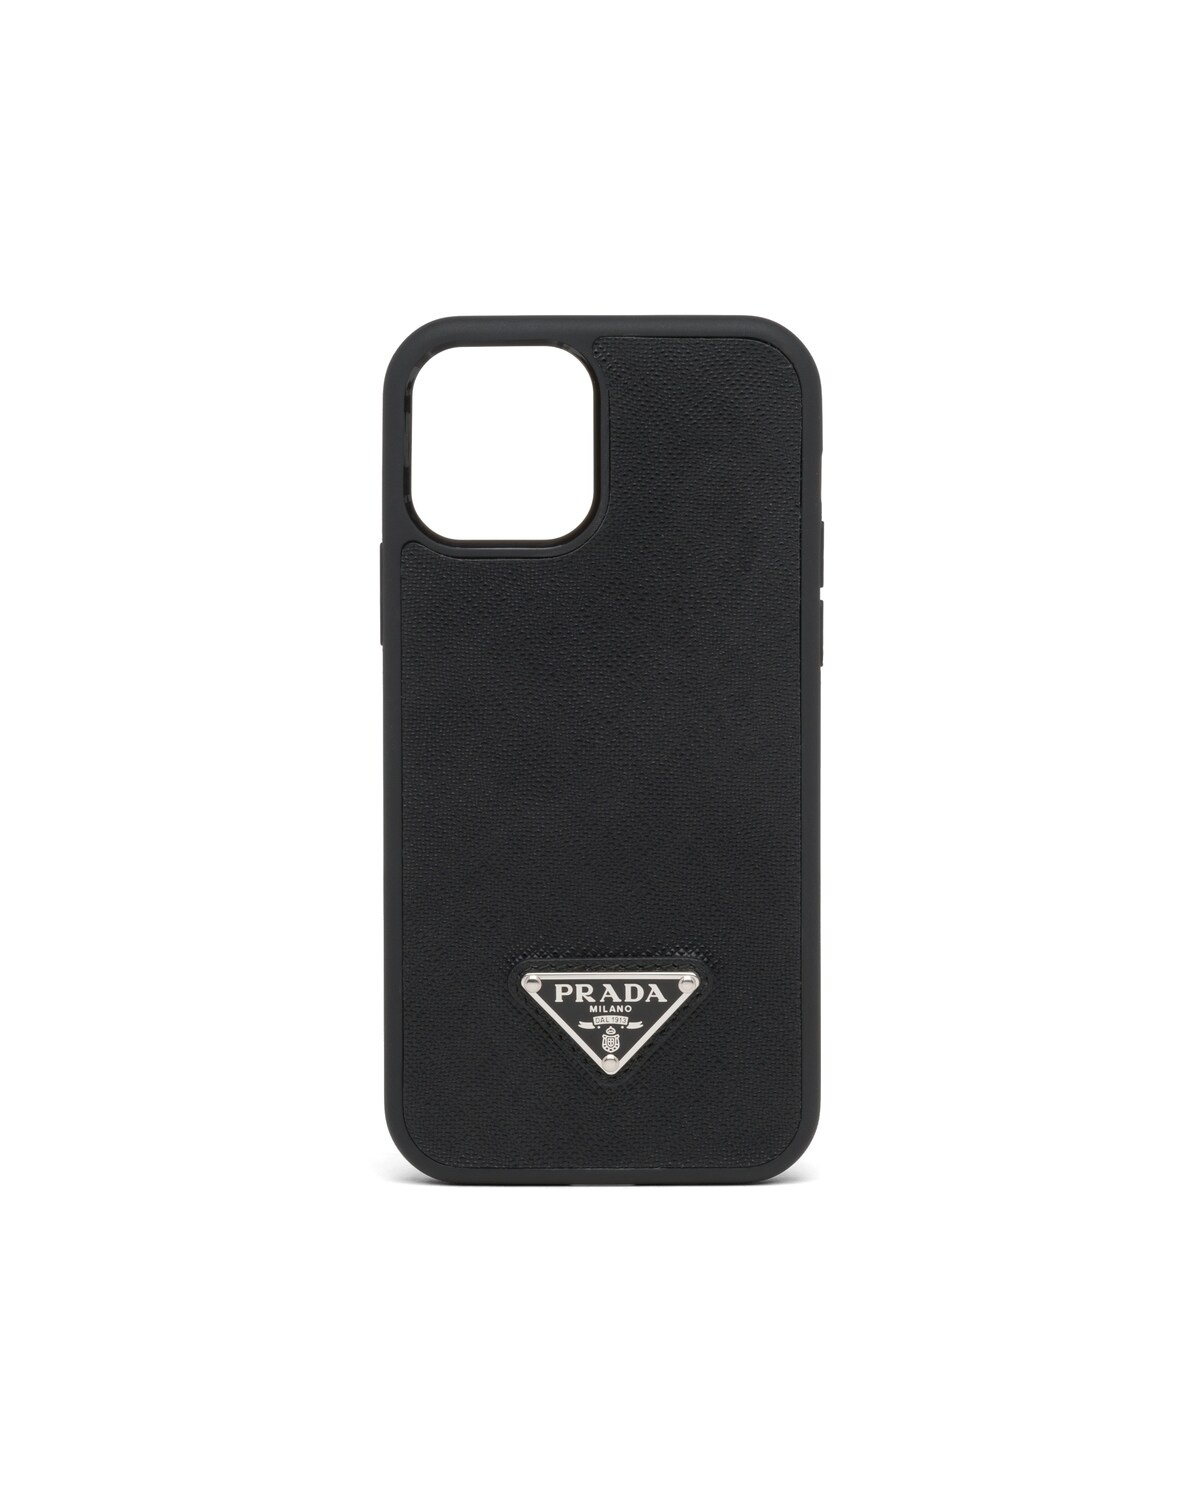 Saffiano cover for iPhone 12 and 12 Pro - 1